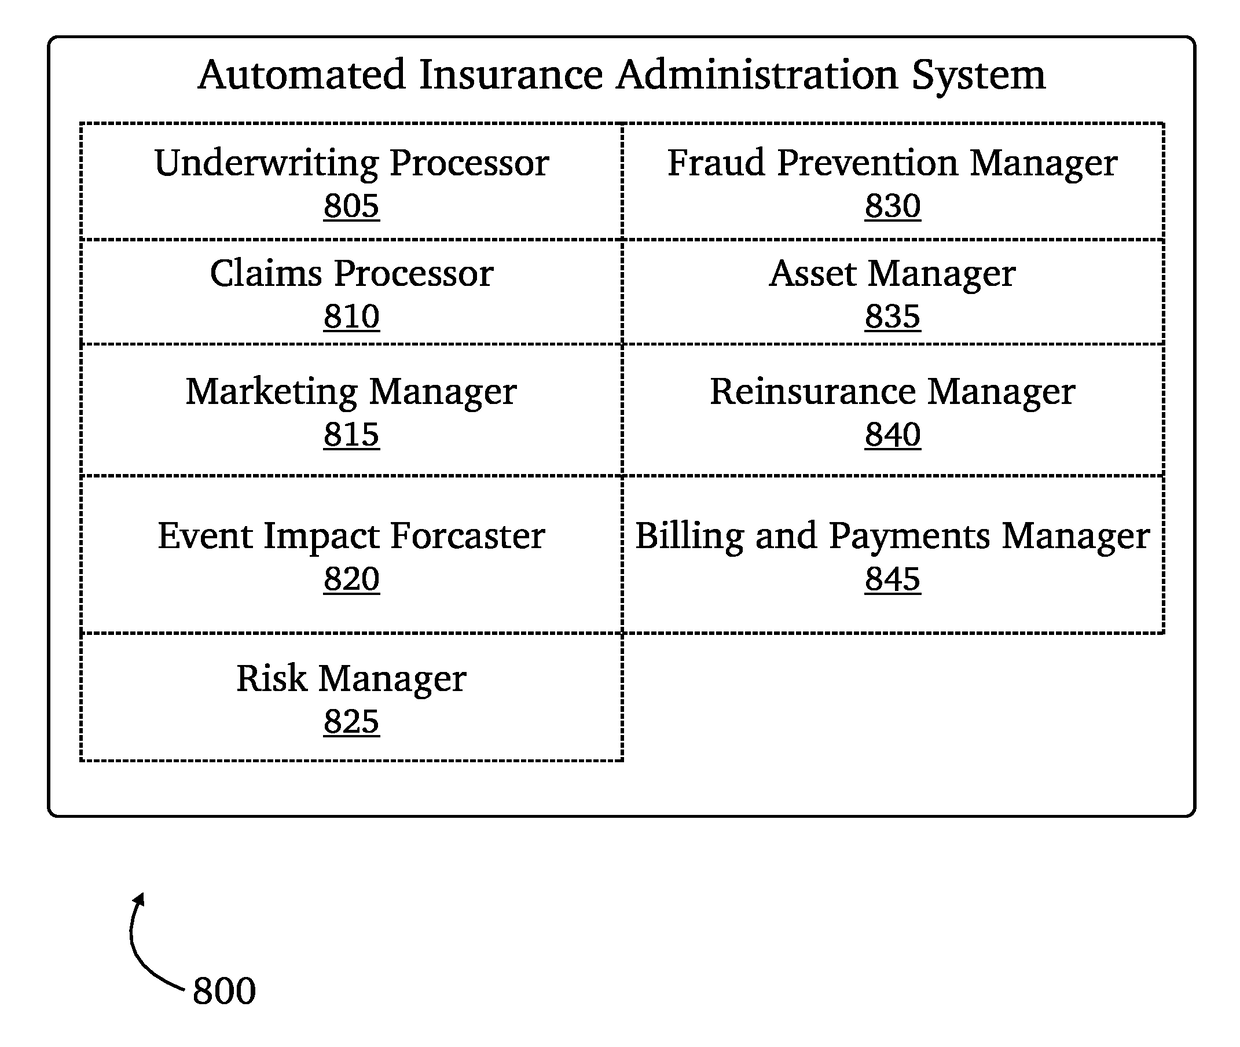 Platform for live issuance and management of cyber insurance policies